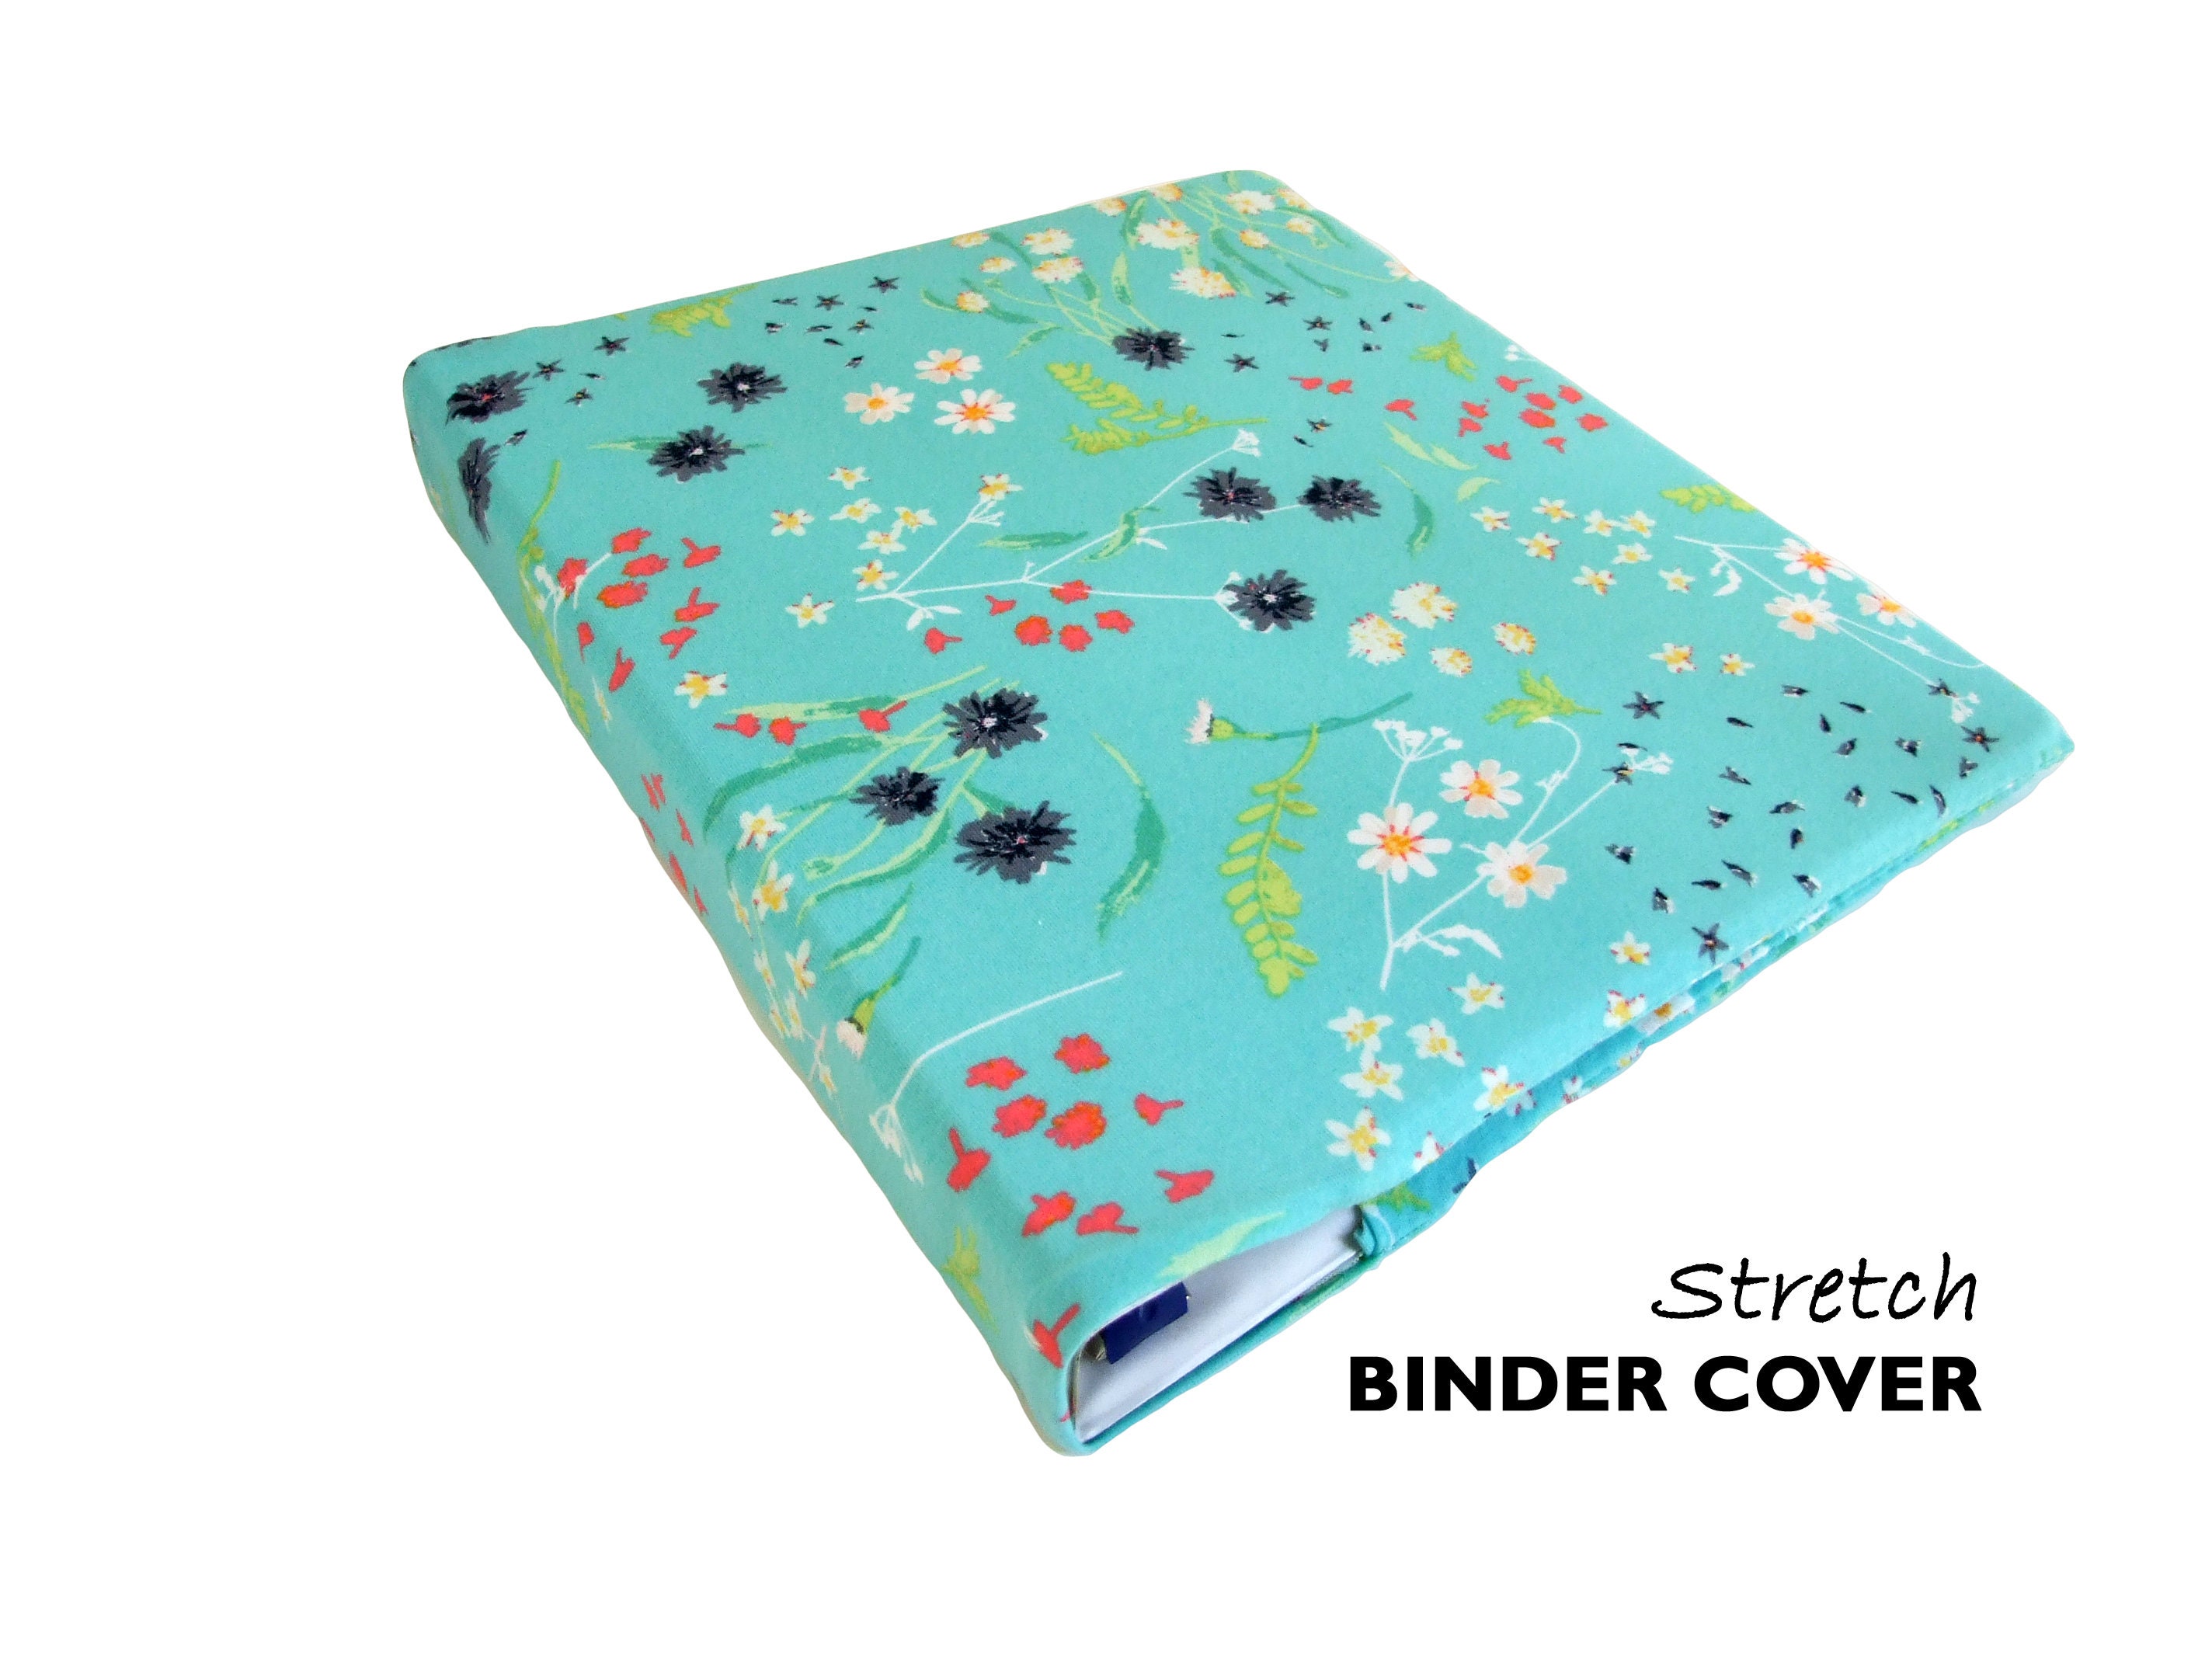 How to cover a binder with fabric and give it a romantic look